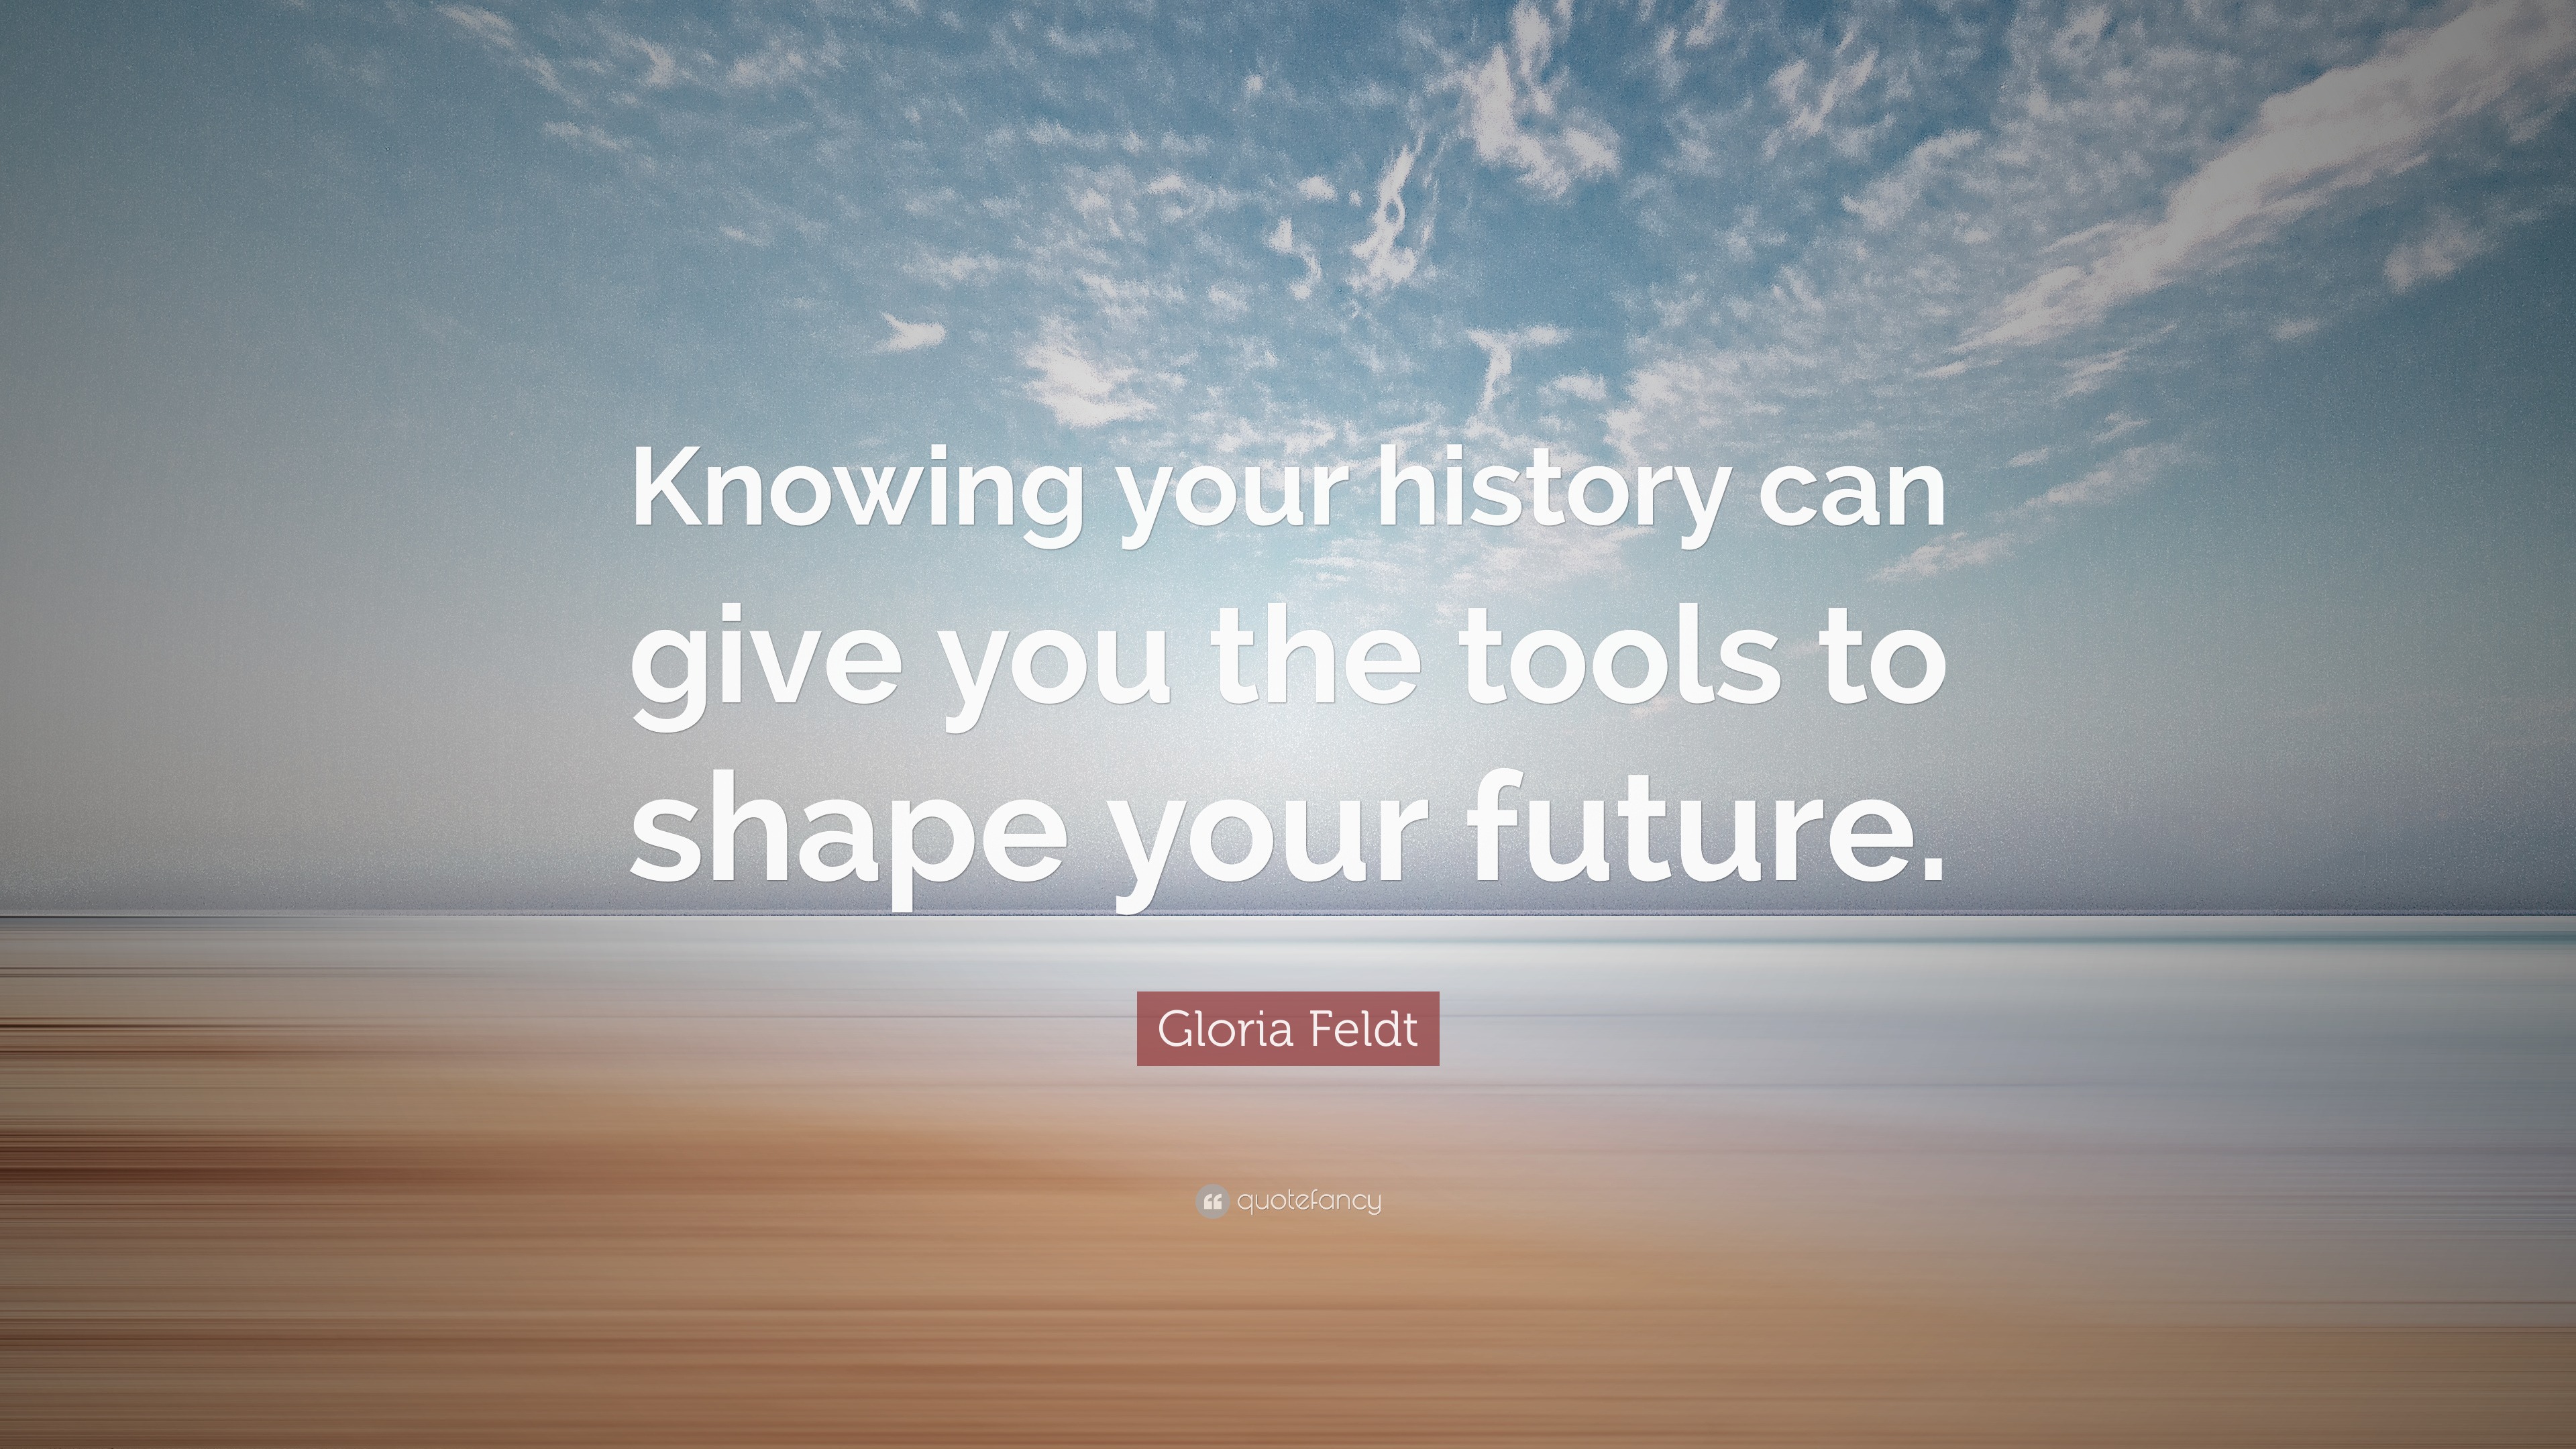 Gloria Feldt Quote: “Knowing your history can give you the tools to